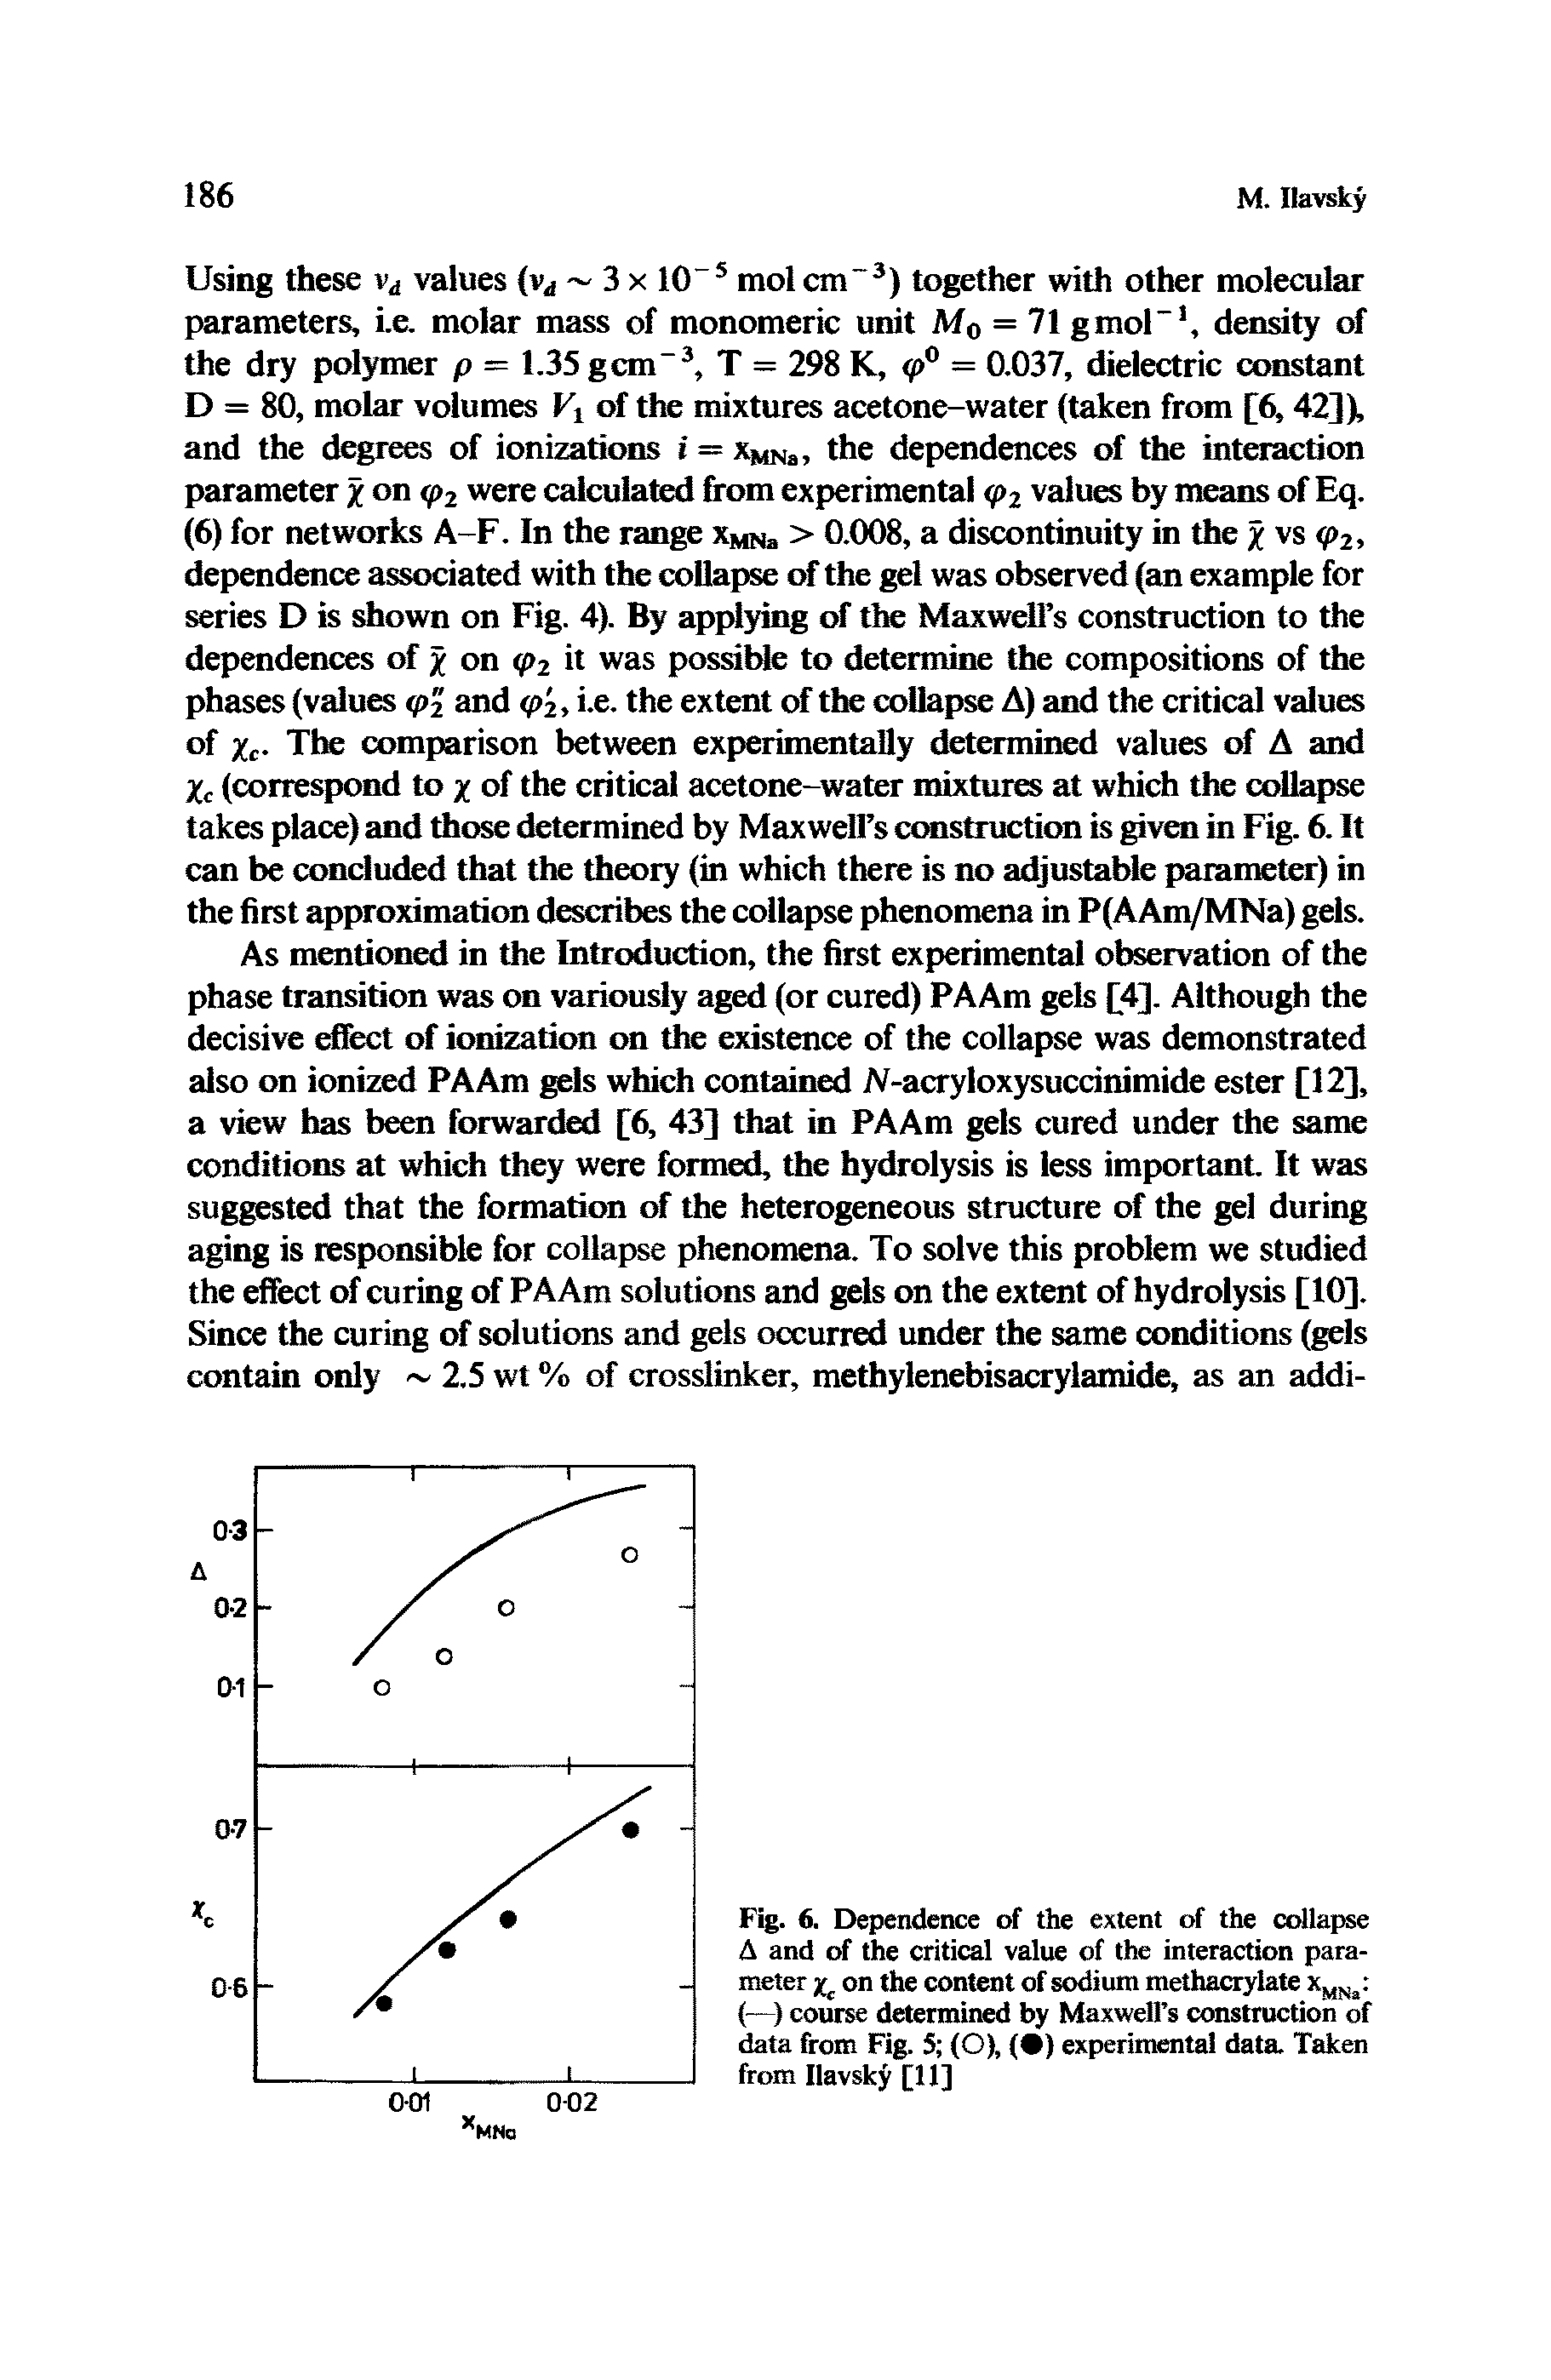 Fig. 6. Dependence of the extent of the collapse A and of the critical value of the interaction parameter yc on the content of sodium methacrylate xMNj (—) course determined by Maxwell s construction of data from Fig. 5 (O), ( ) experimental data. Taken from Ilavsky [11]...